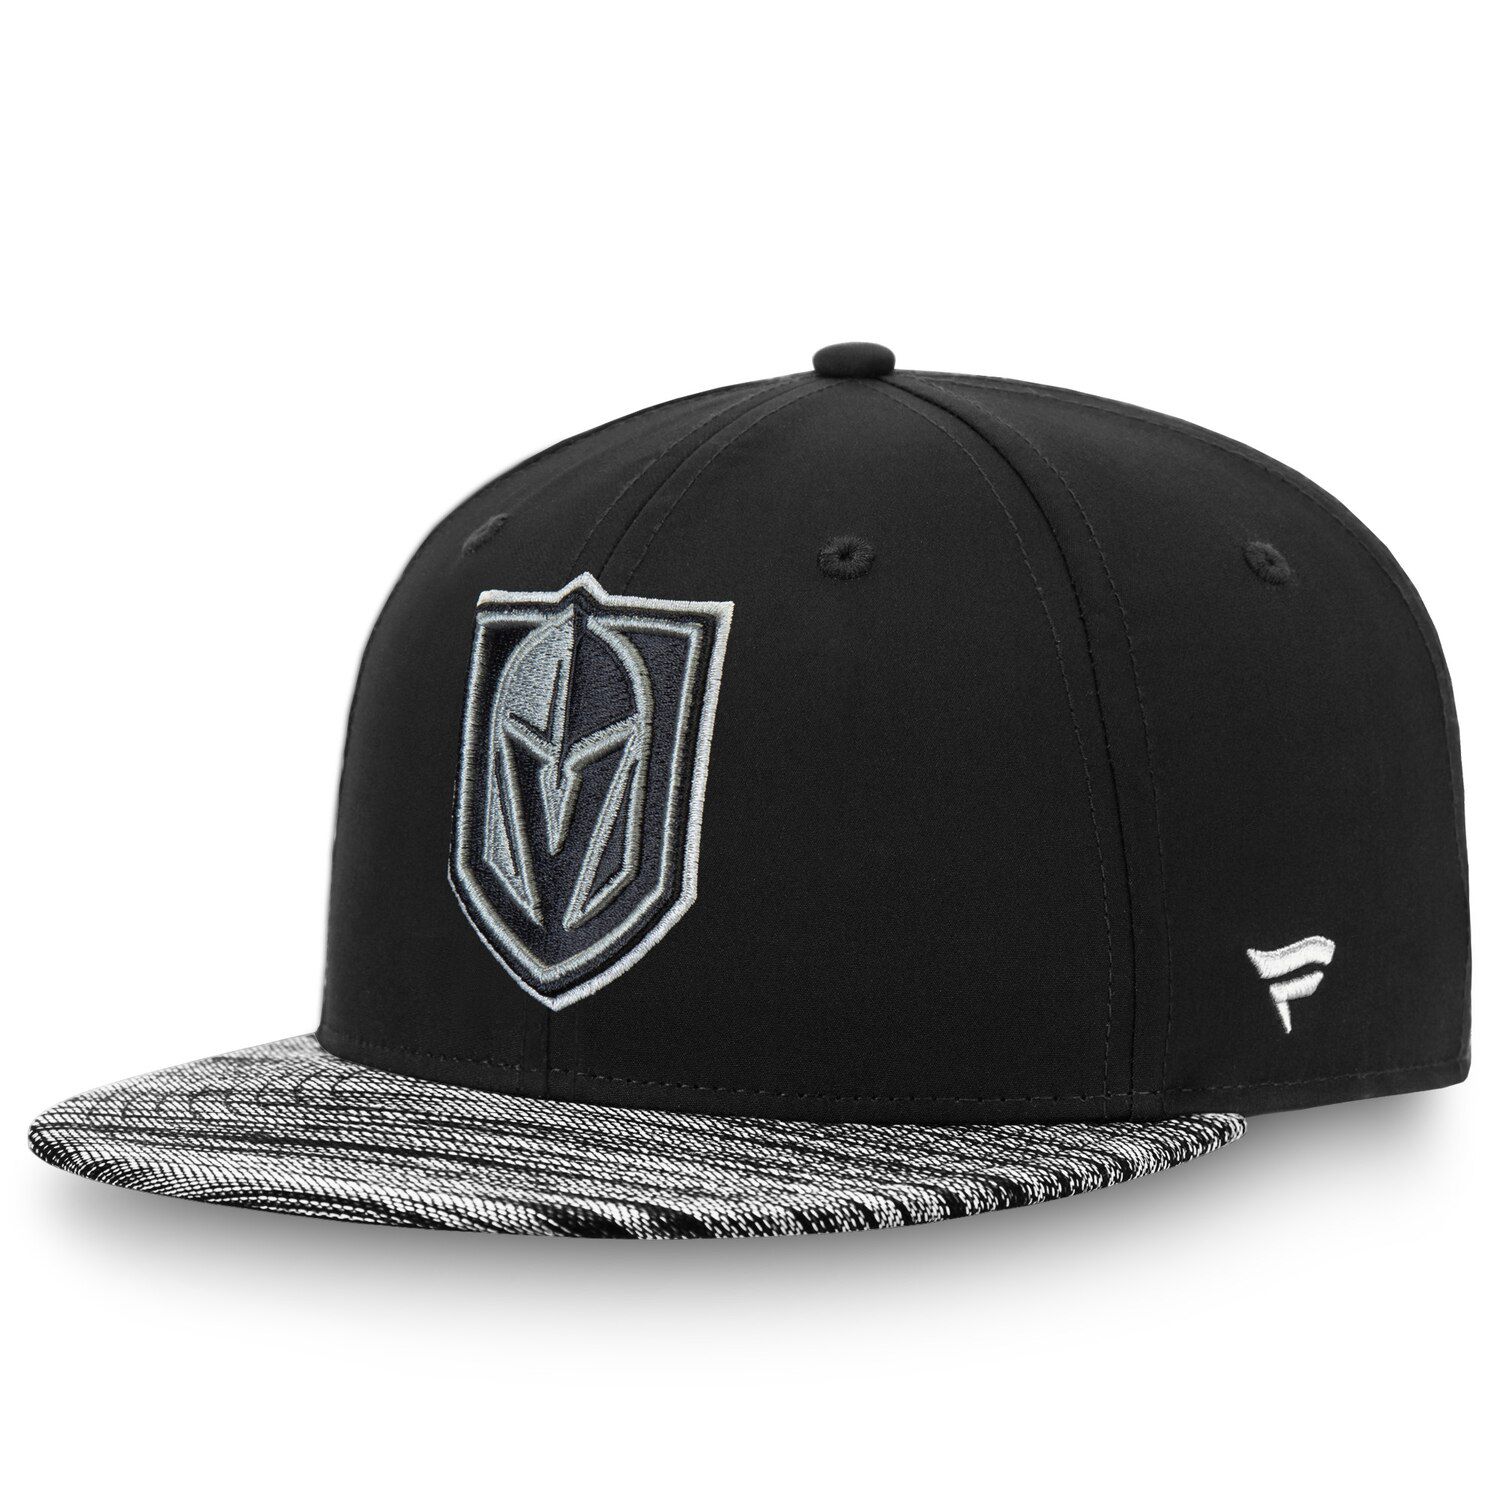 vegas golden knights fitted hat